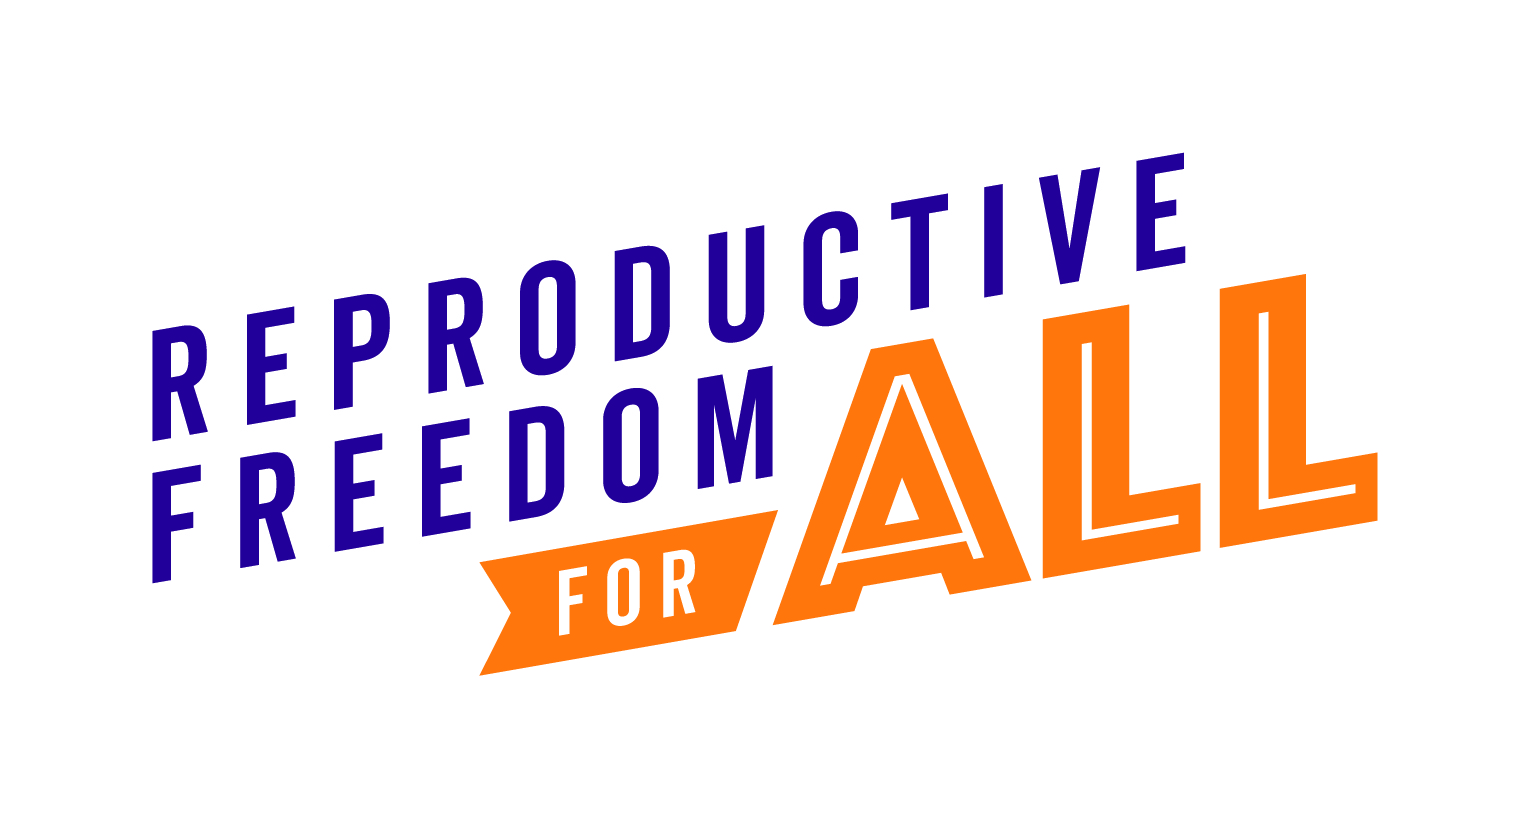 et details and sign up for "YES on Proposal 3 Canvass in Ann Arbor" hosted by Reproductive Freedom for All